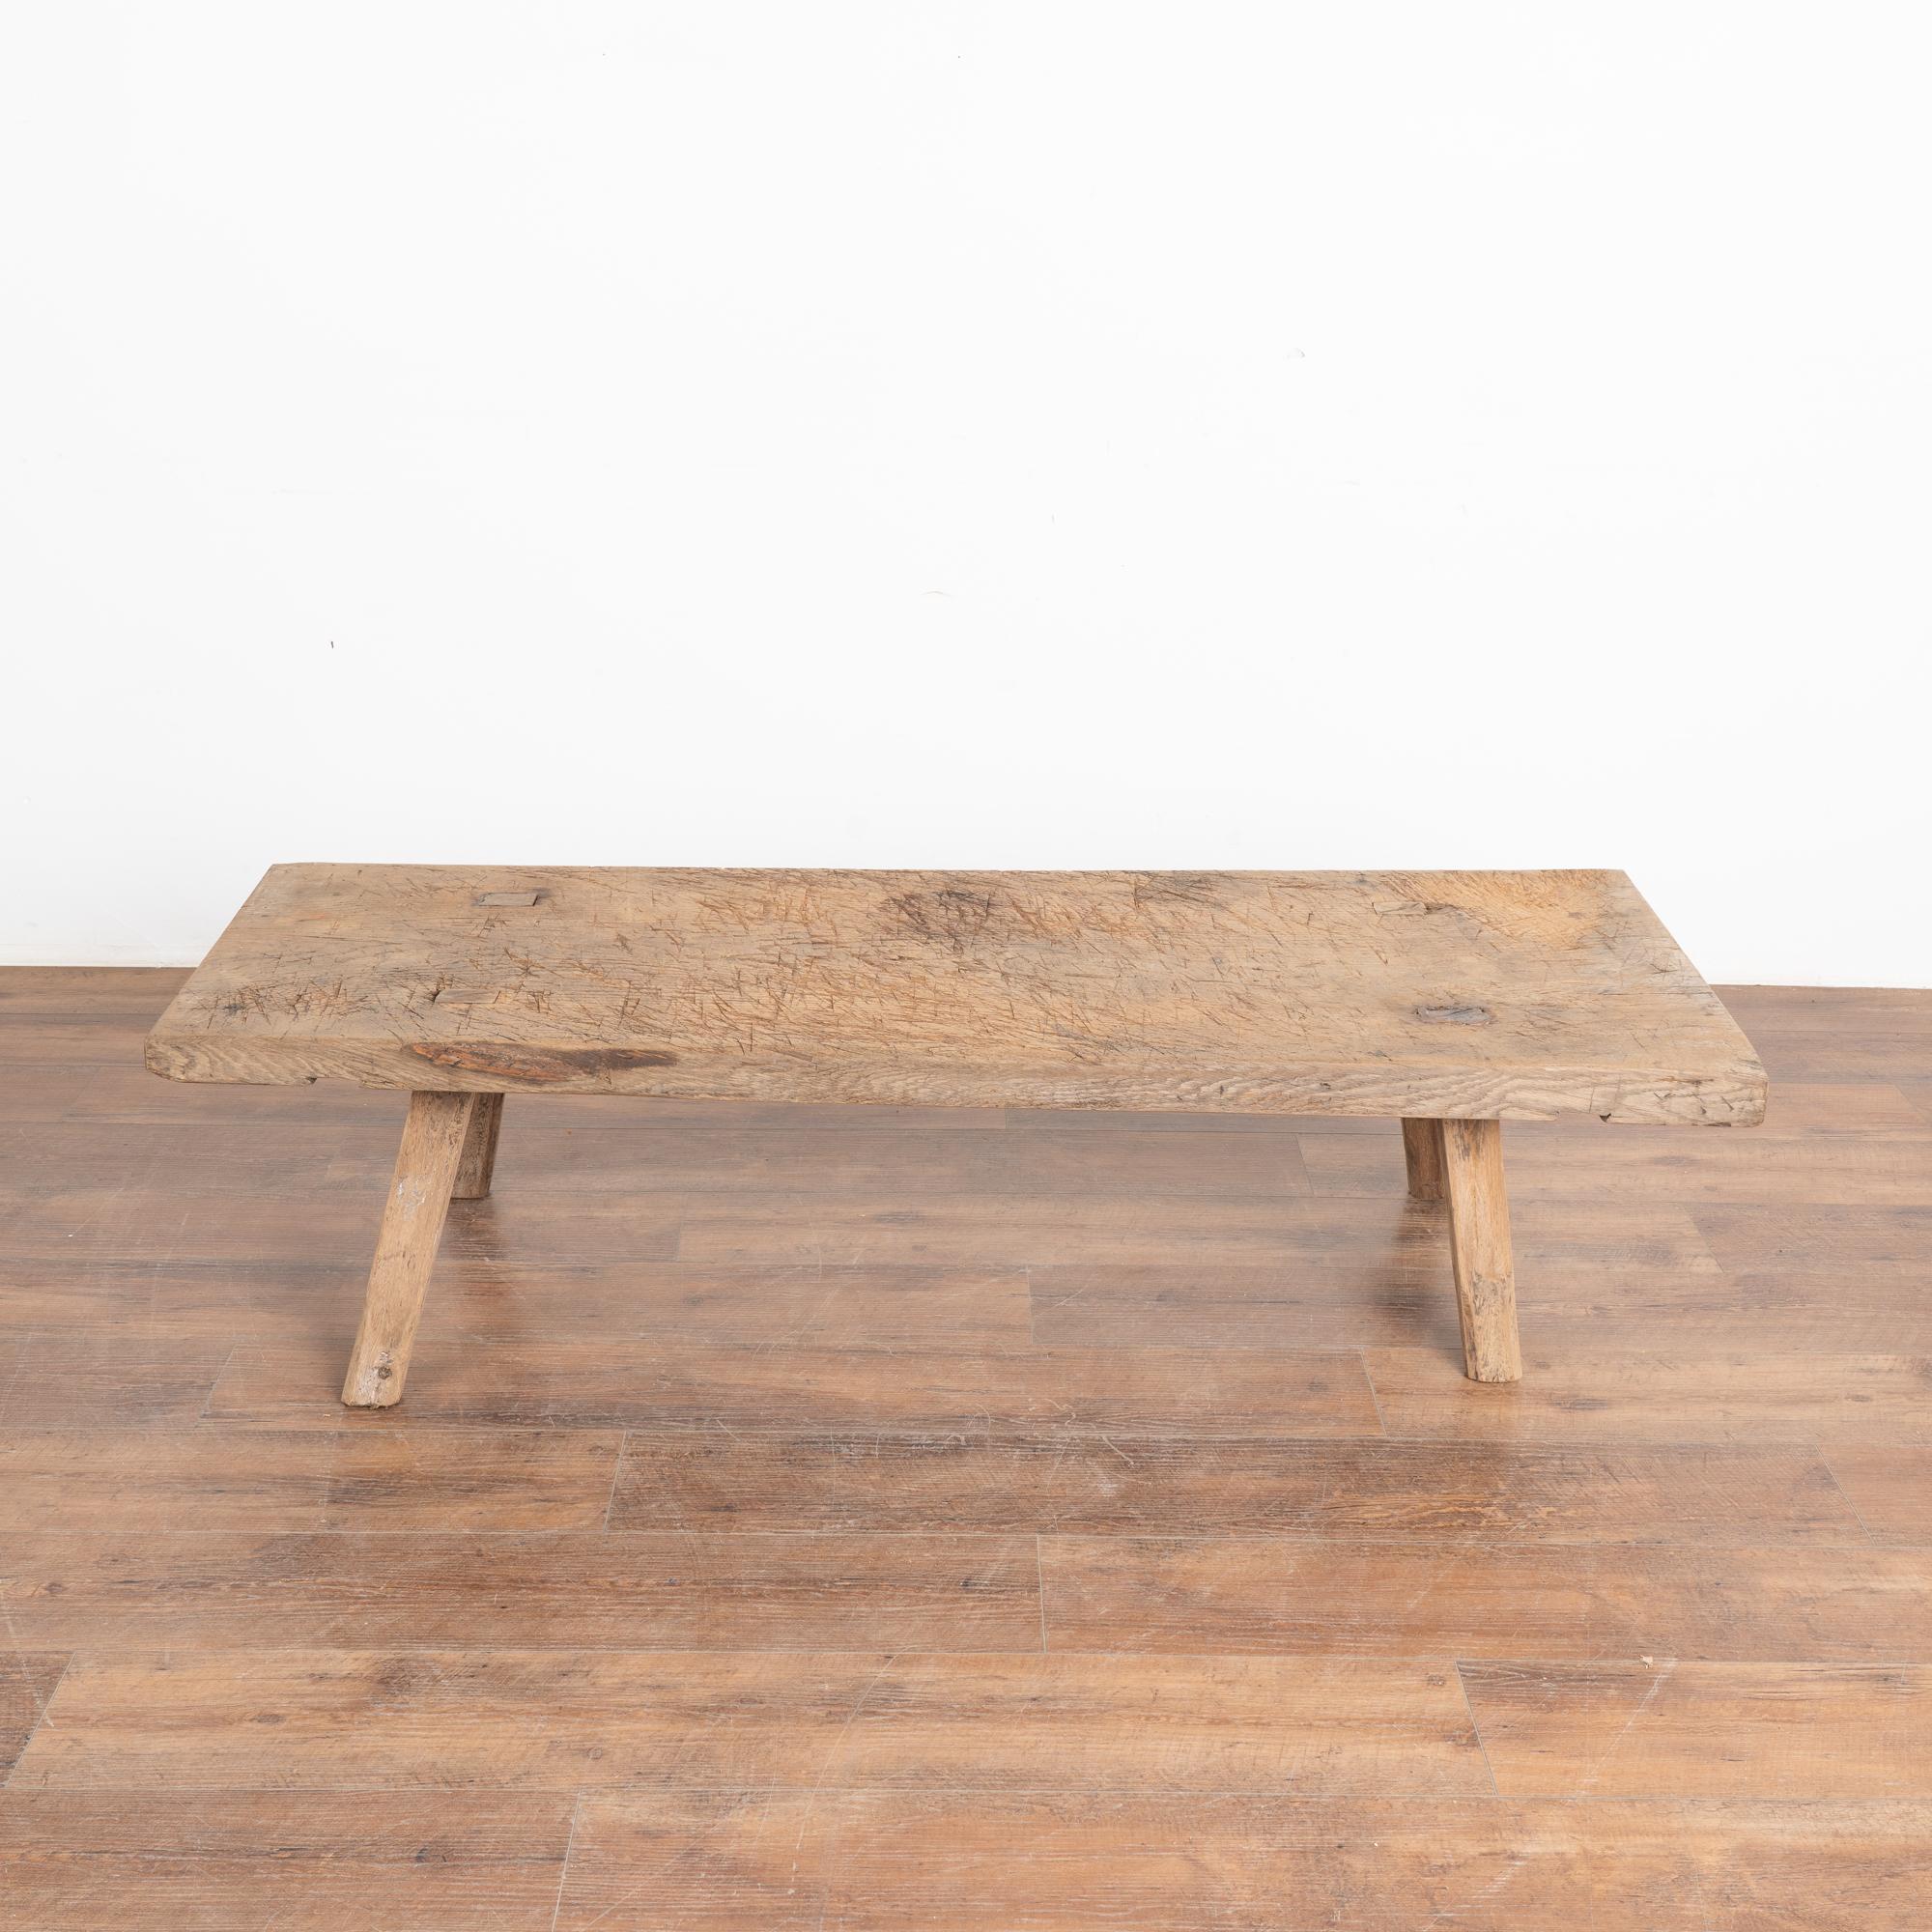 Hungarian Rustic Coffee Table With Peg Legs, Hungary circa 1890 For Sale